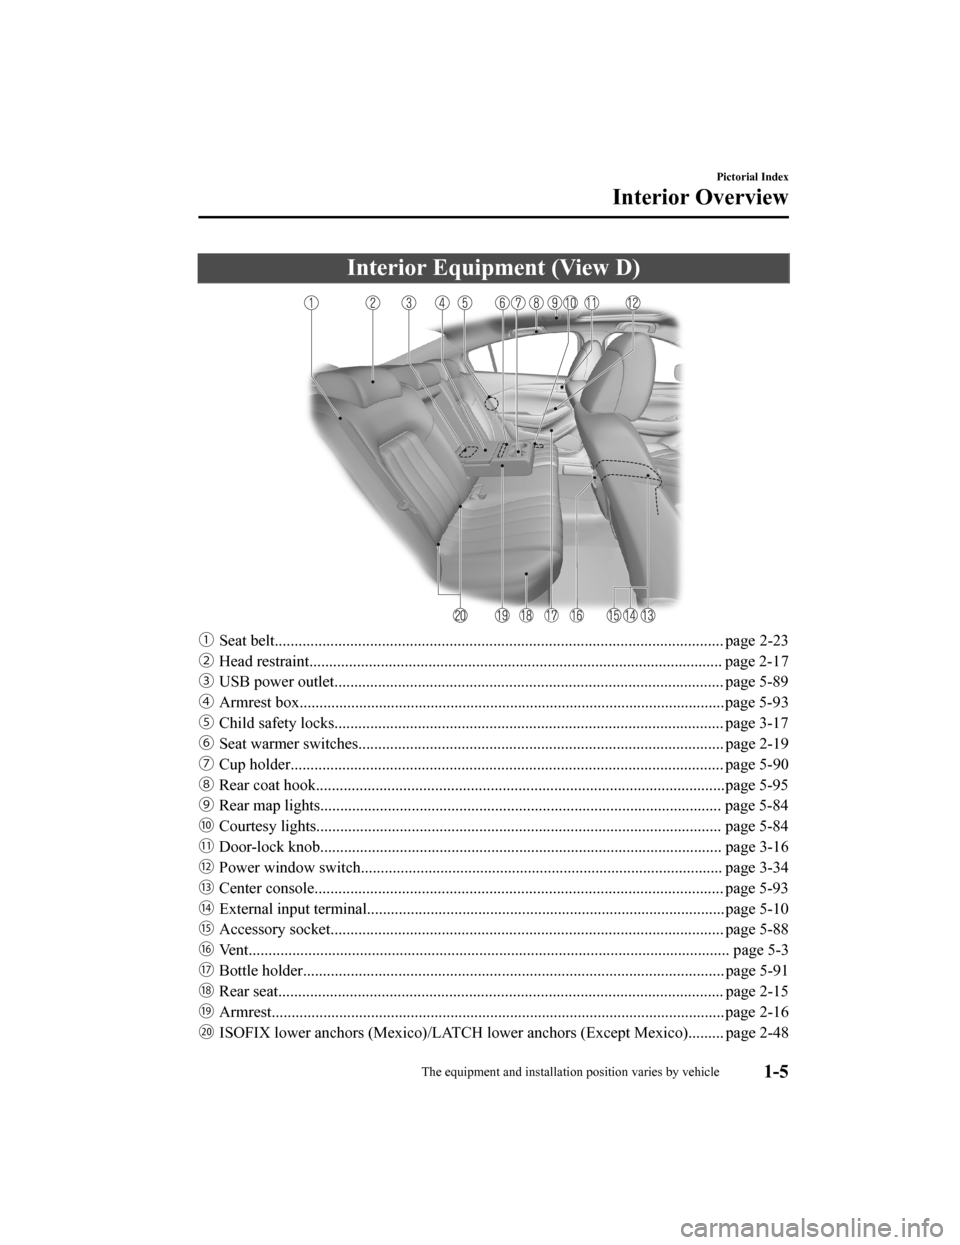 MAZDA MODEL 6 2020  Owners Manual (in English) Interior Equipment (View D)
ƒSeat belt................................................................................................................. page  2-23
„ Head restraint................